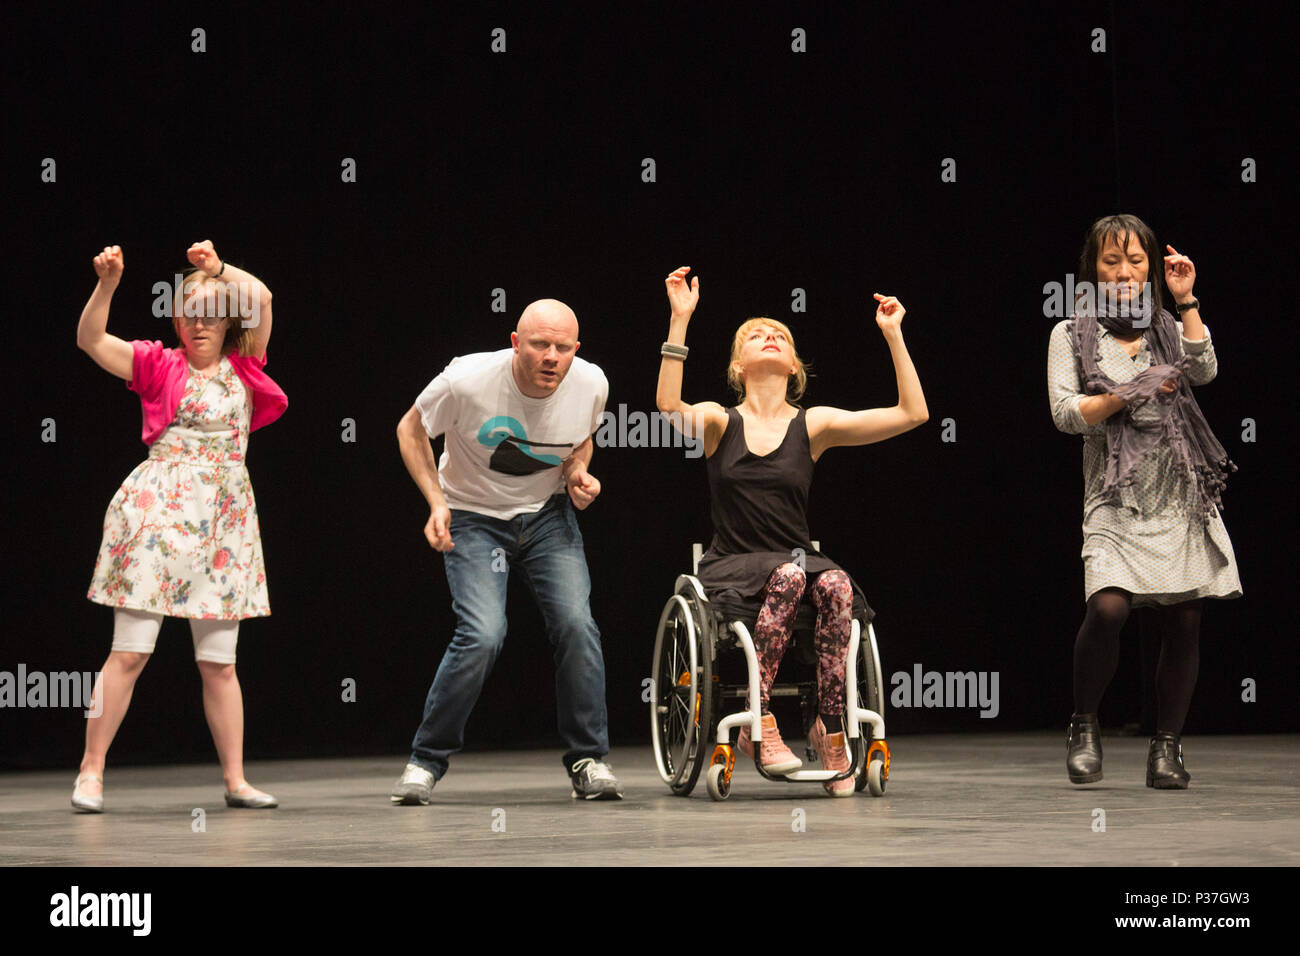 London, UK. 20 March 2015. L-R: Katy Francis, Gary Clarke. Suzie Birchwood and Jia-Yu Corti. Sadler's Wells presents a weekend of inclusive dance from 20 to 22 March 2015. Candoco Dance Company, a contemporary dance comapny of disabled and non-disabled performers presents a restaging of Jerome Bel's award-winning The Show Must Go On. The weekend also includes the final performances of the inaugural year of the Sadler's Wells =dance series, a presentation of inclusive dance by both established and emerging deaf and disabled artists in the Lilian Baylis Studio. Stock Photo